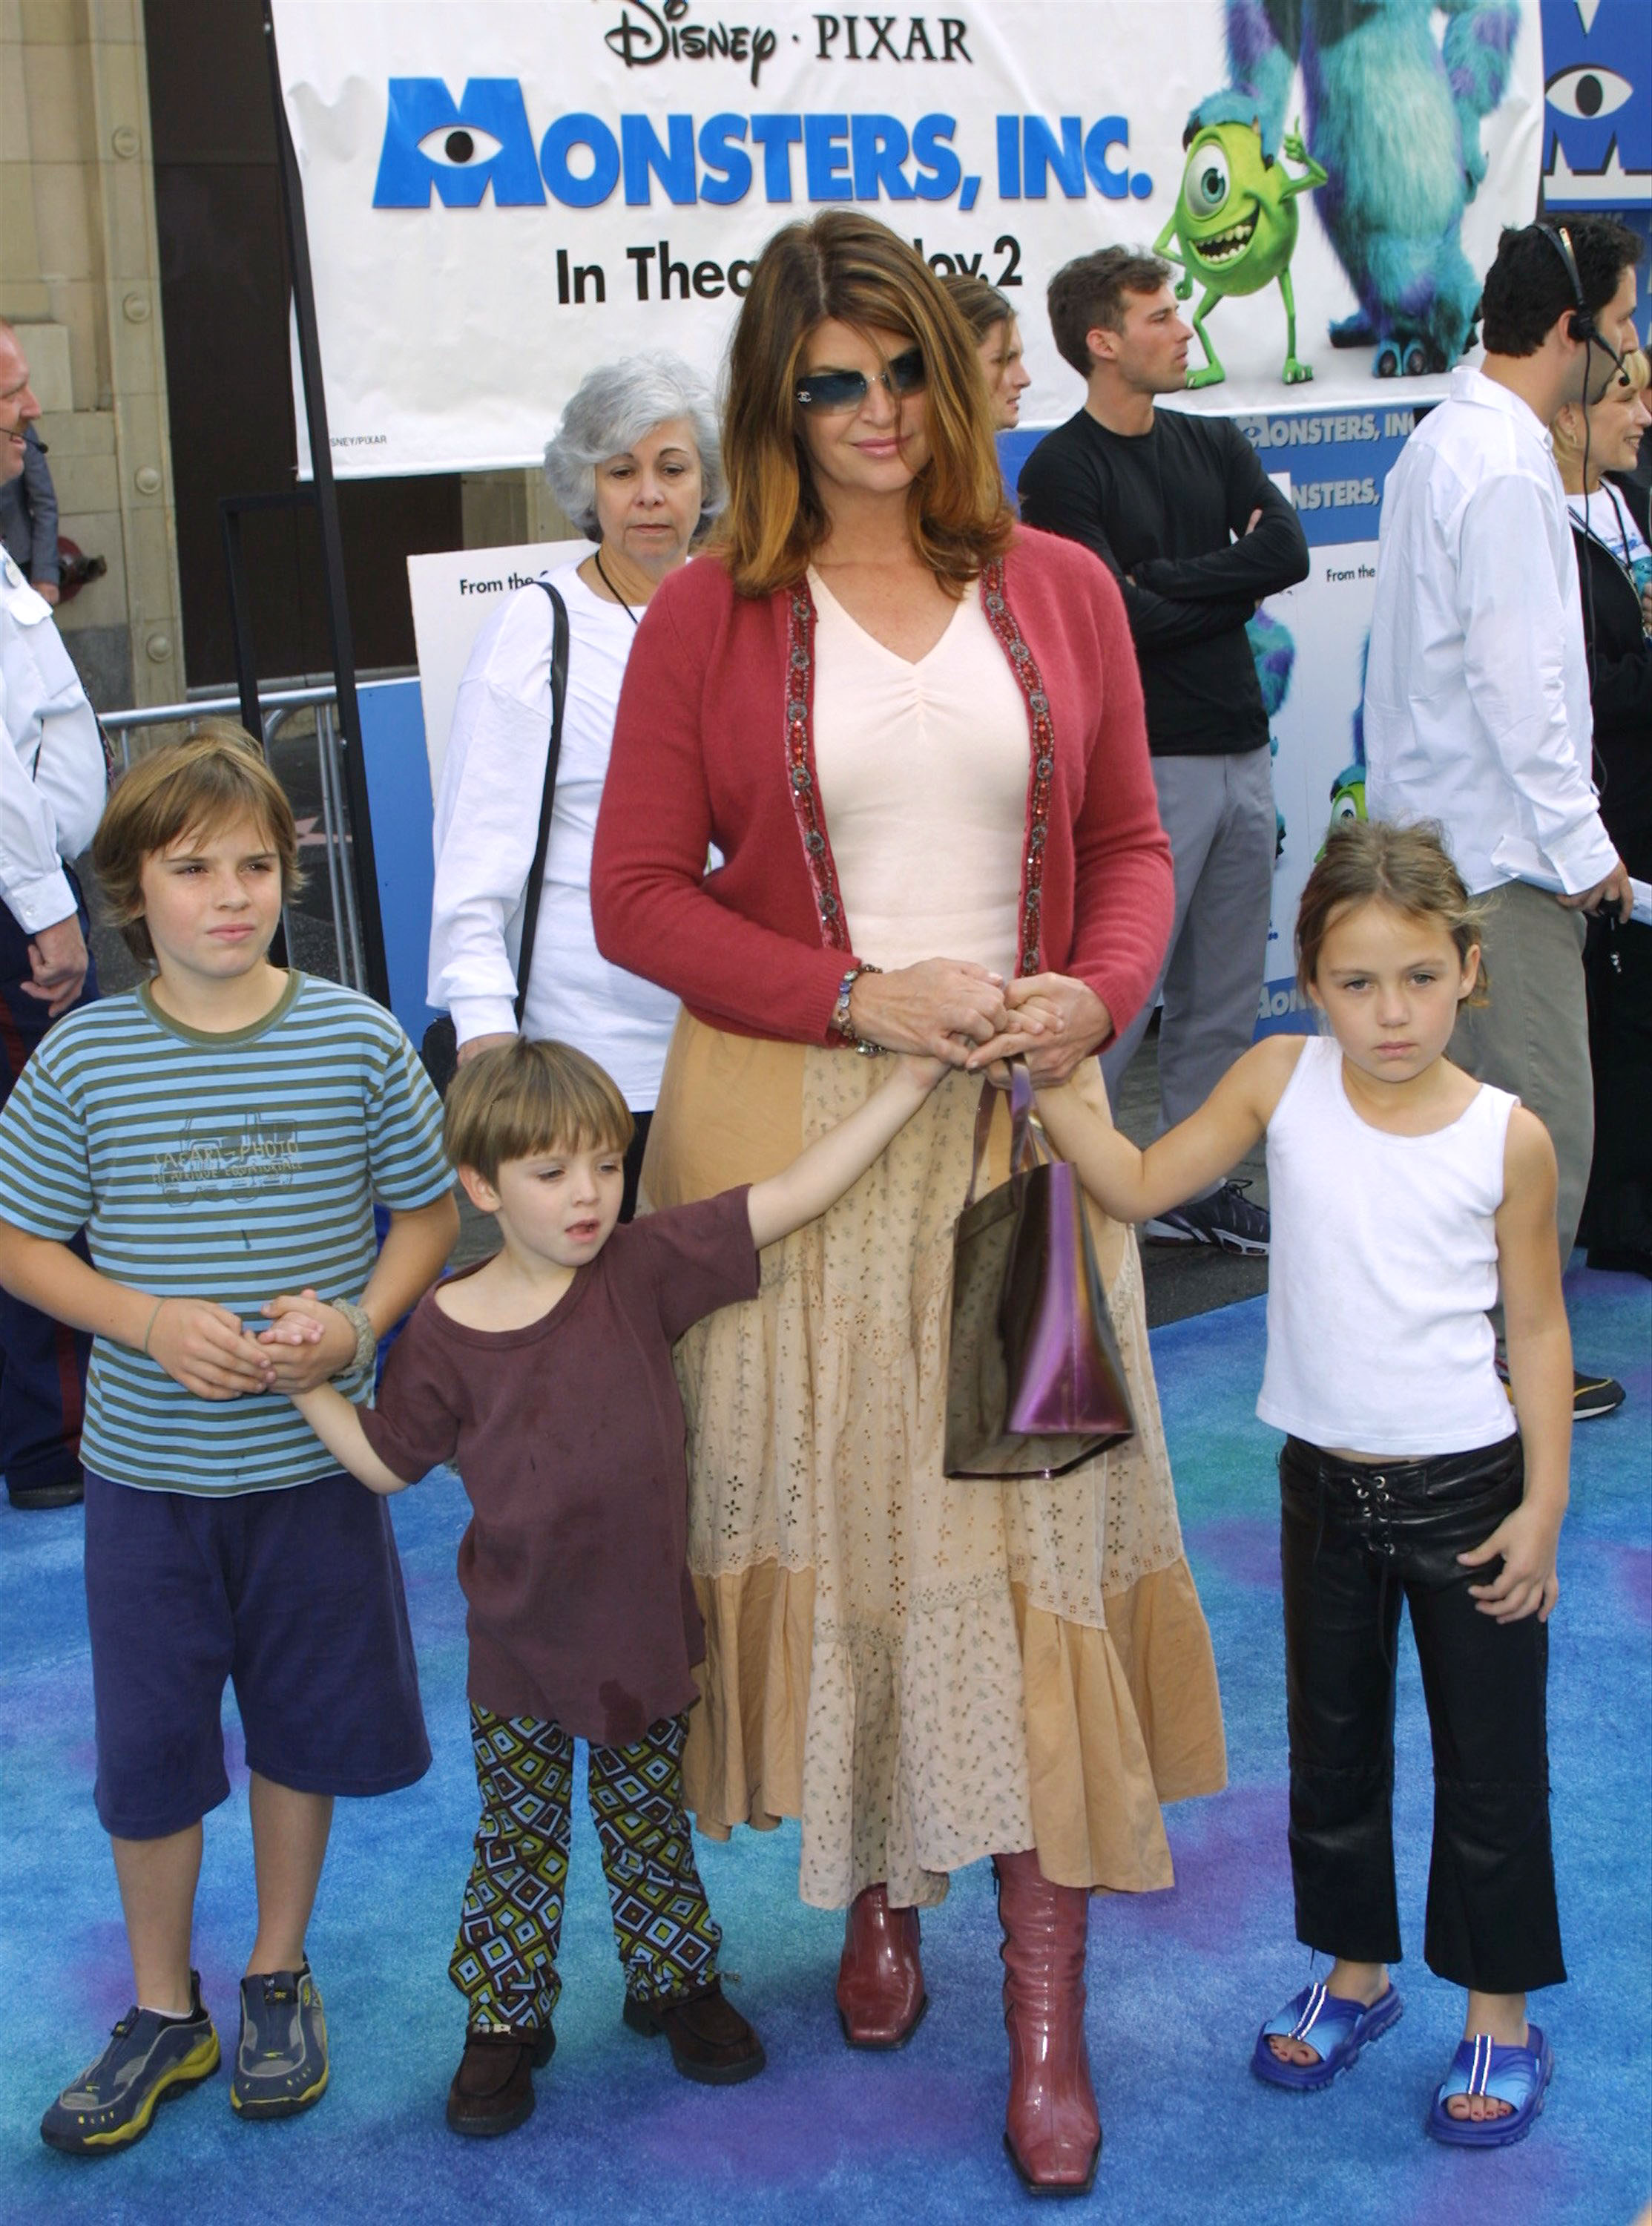 Kirstie Alley and her kids arrive at the world premiere of "Monsters, Inc." at the El Capitan Theatre in Hollywood, California, on October 28, 2001. | Source: Getty Images